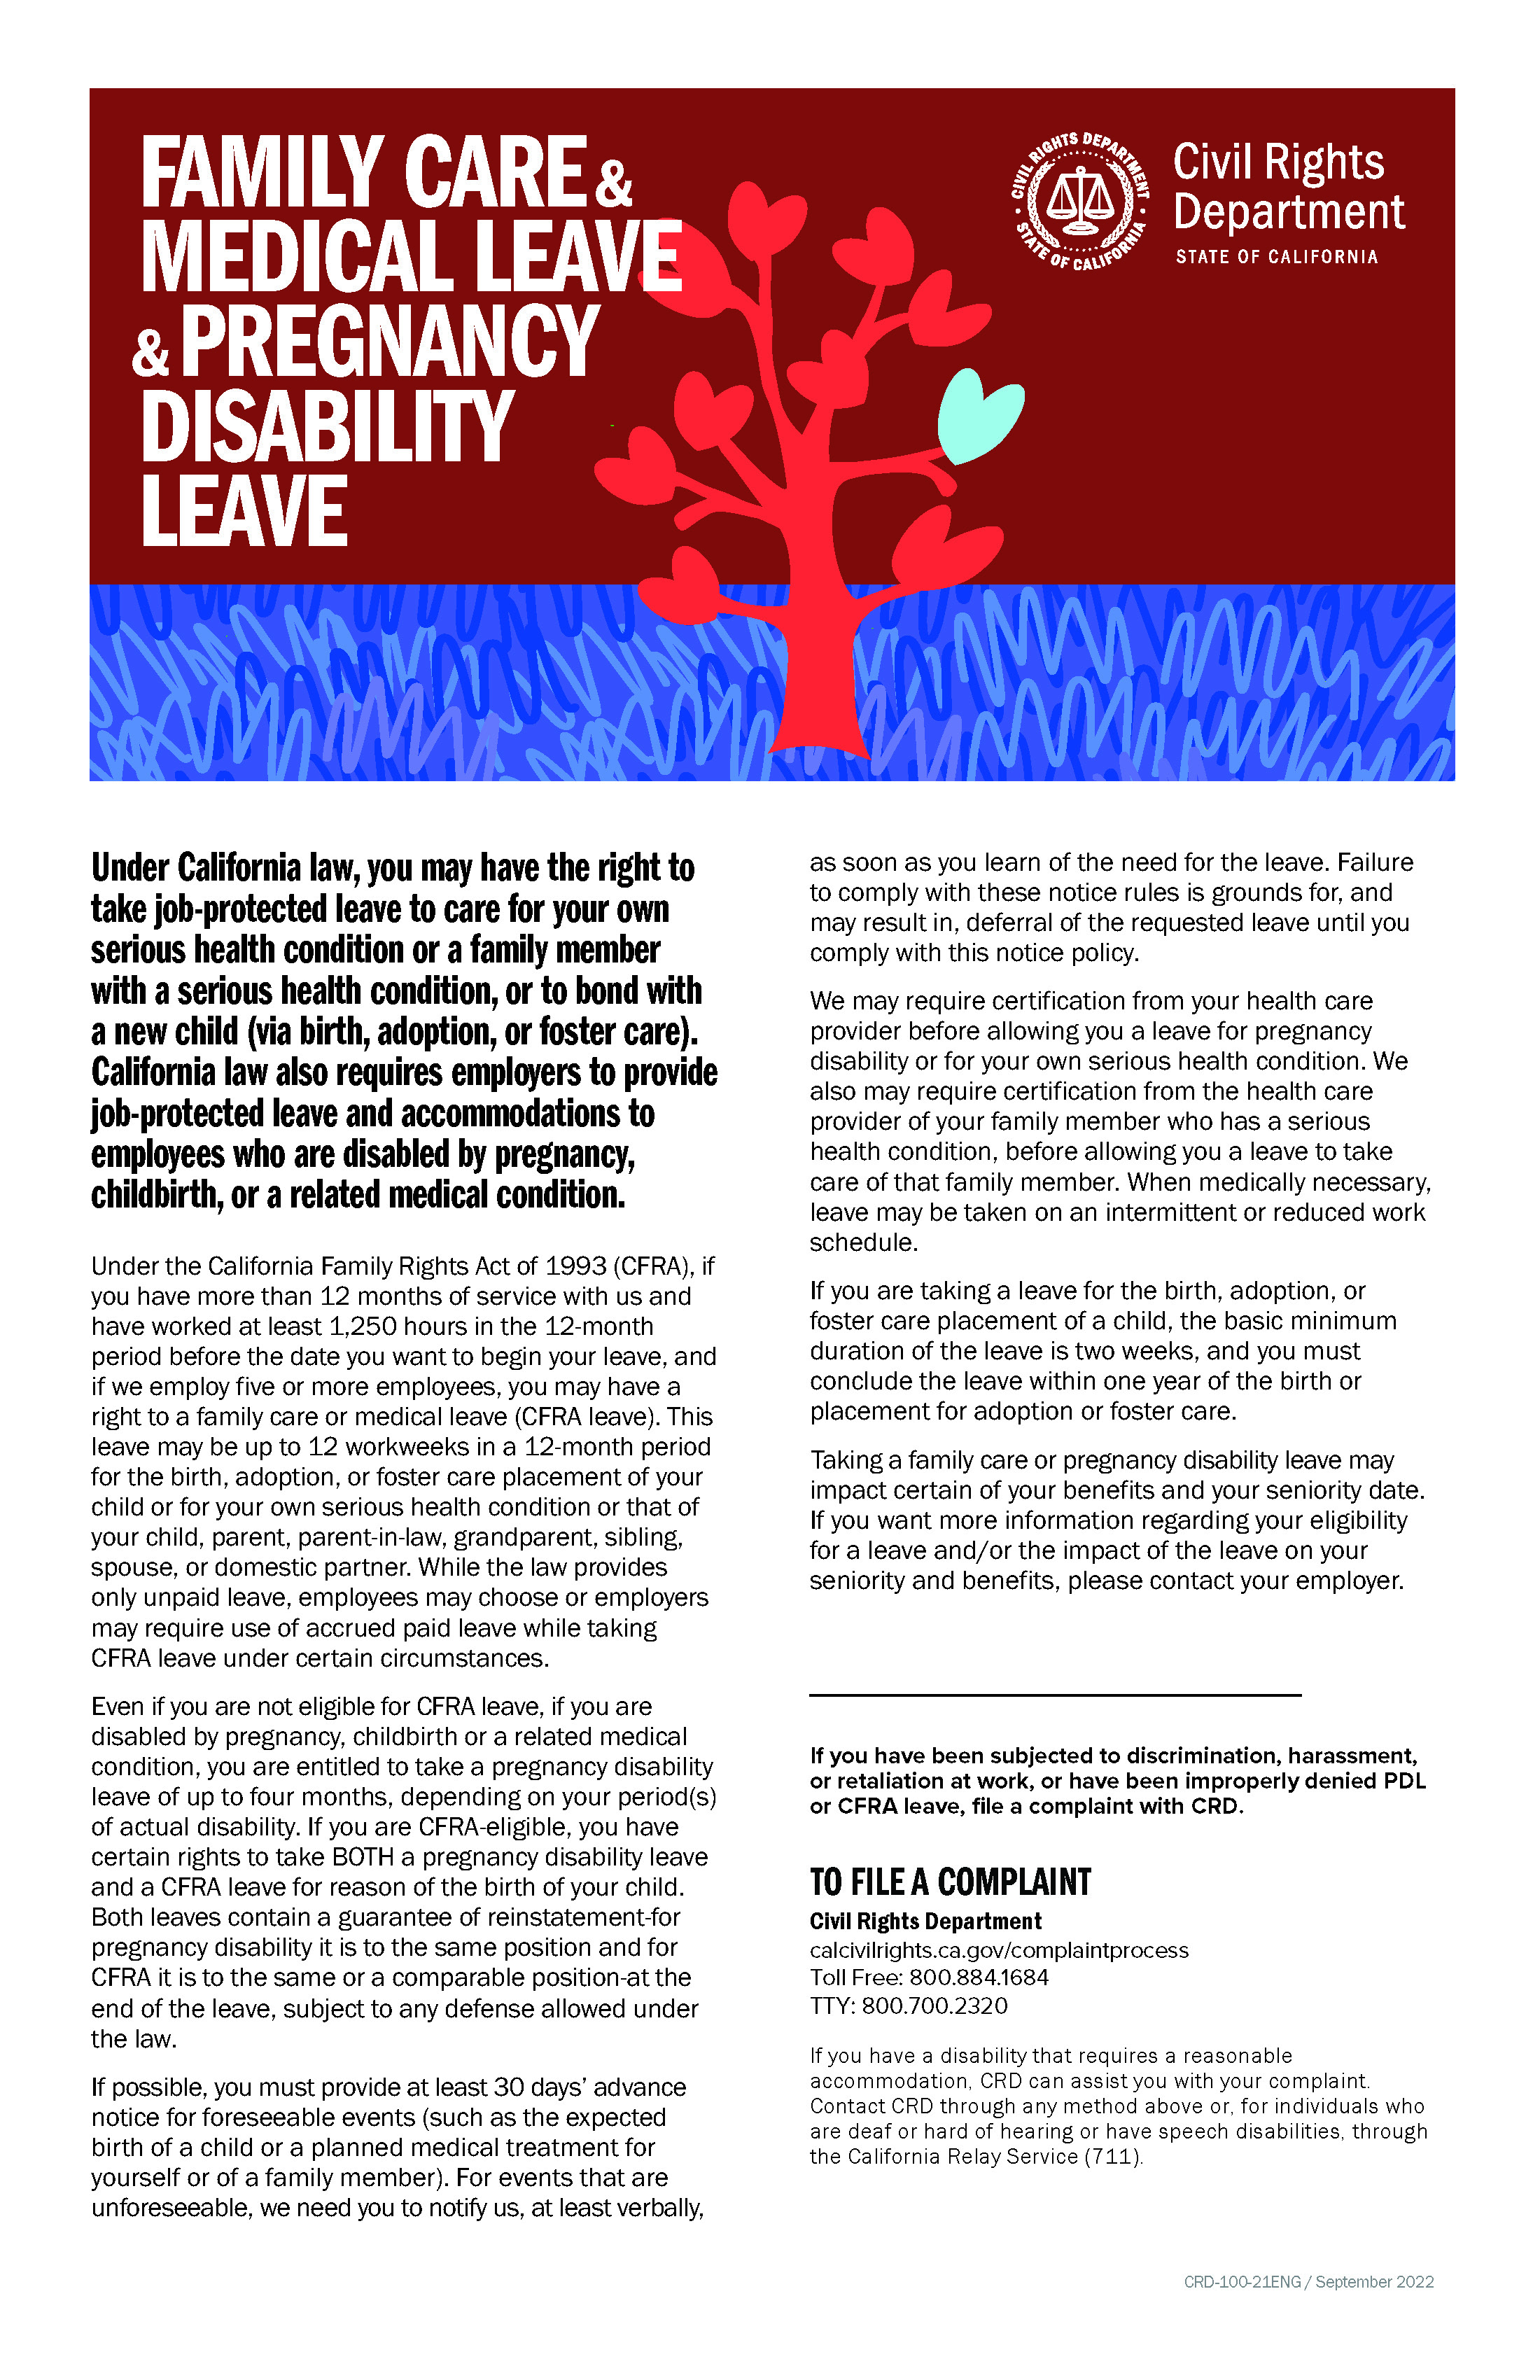 Family Care & Medical Leave Act Poster